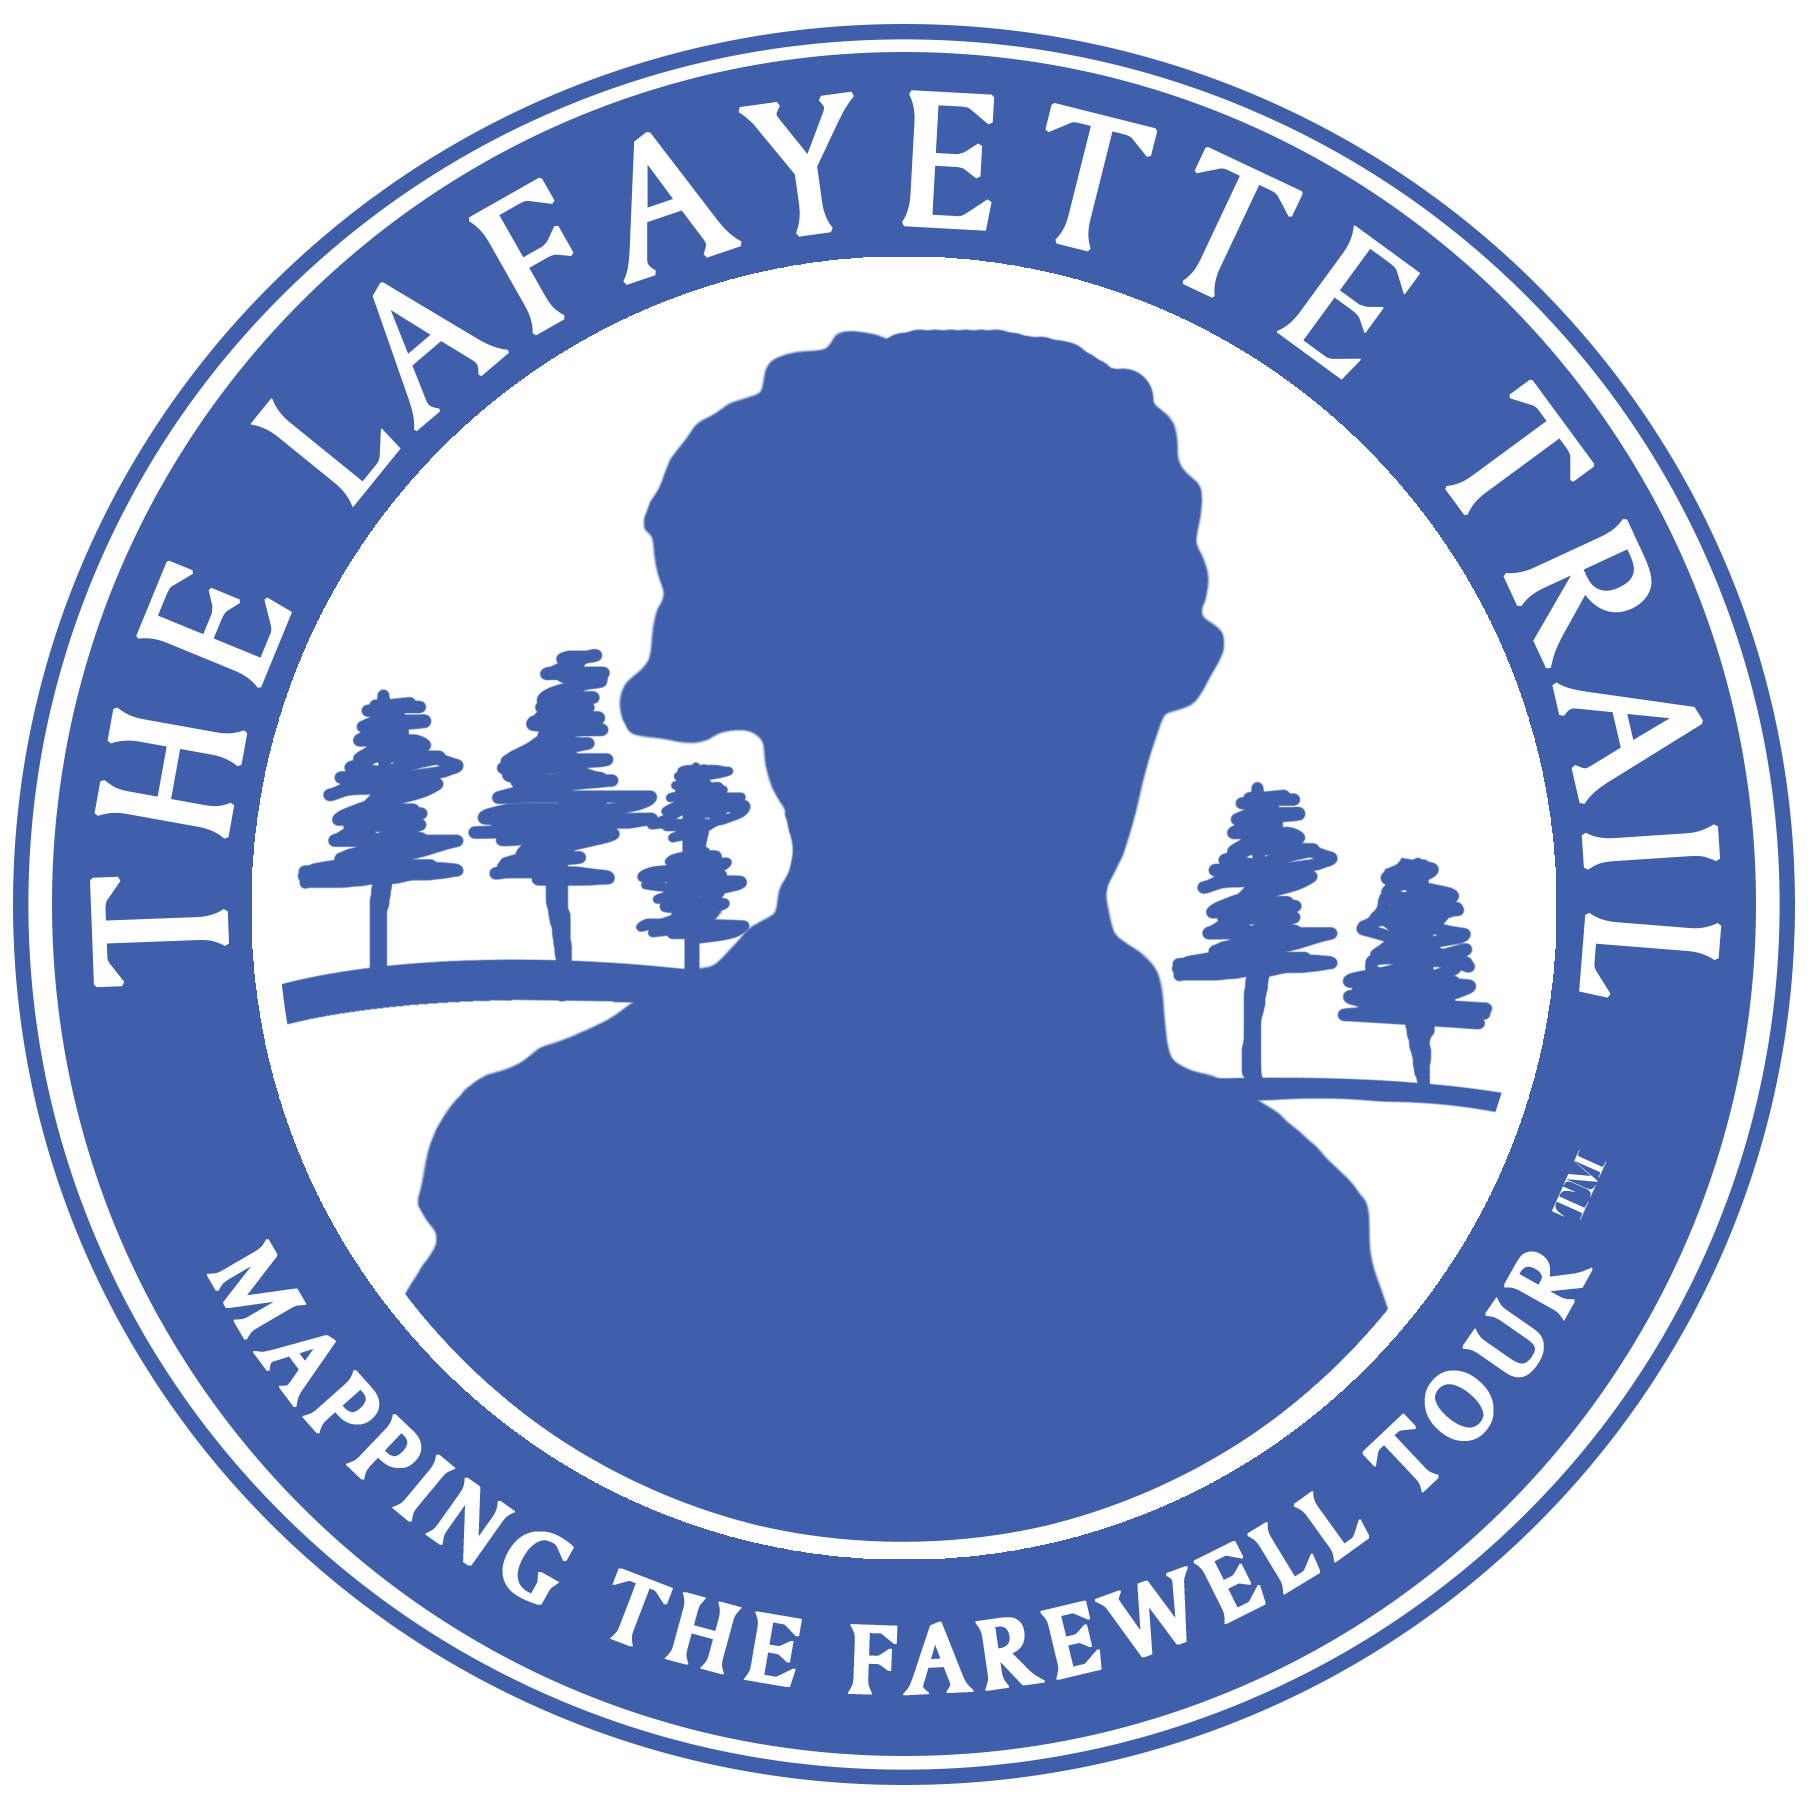 All in blue. The Lafayette Trail Mapping the Farewell Tour. Silhouette of Lafayette bust with tree in the background